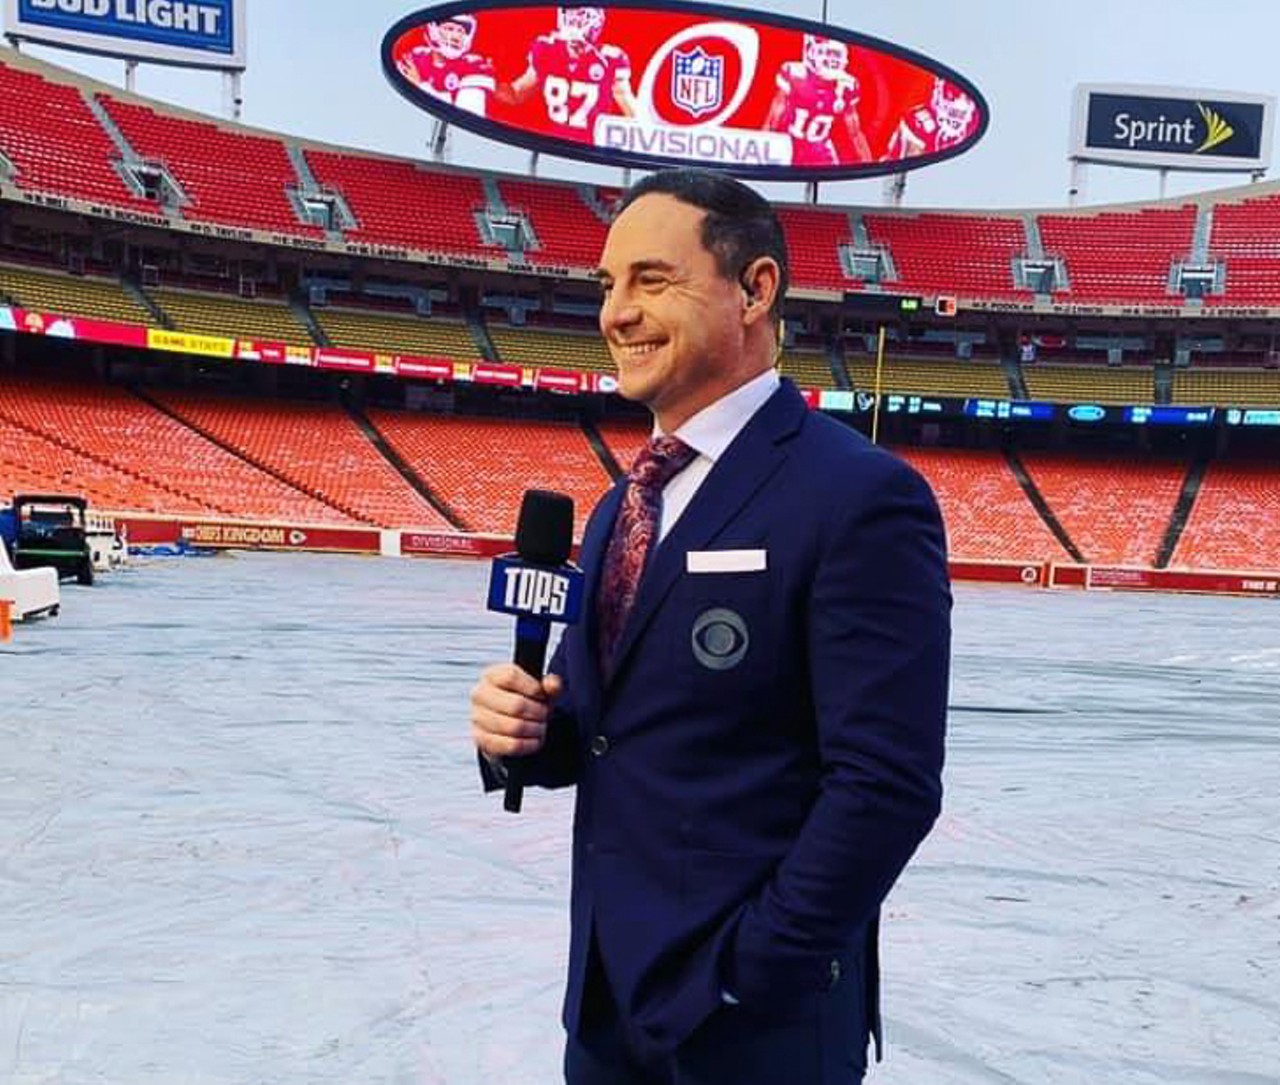 Jay Feely - Jesuit
Feely started his 15-year kicking career in the Arena Football League before moving up to the NFL. Now, he&#146;s a CBS Sports football analyst.
Photo via Jay Feely/Facebook